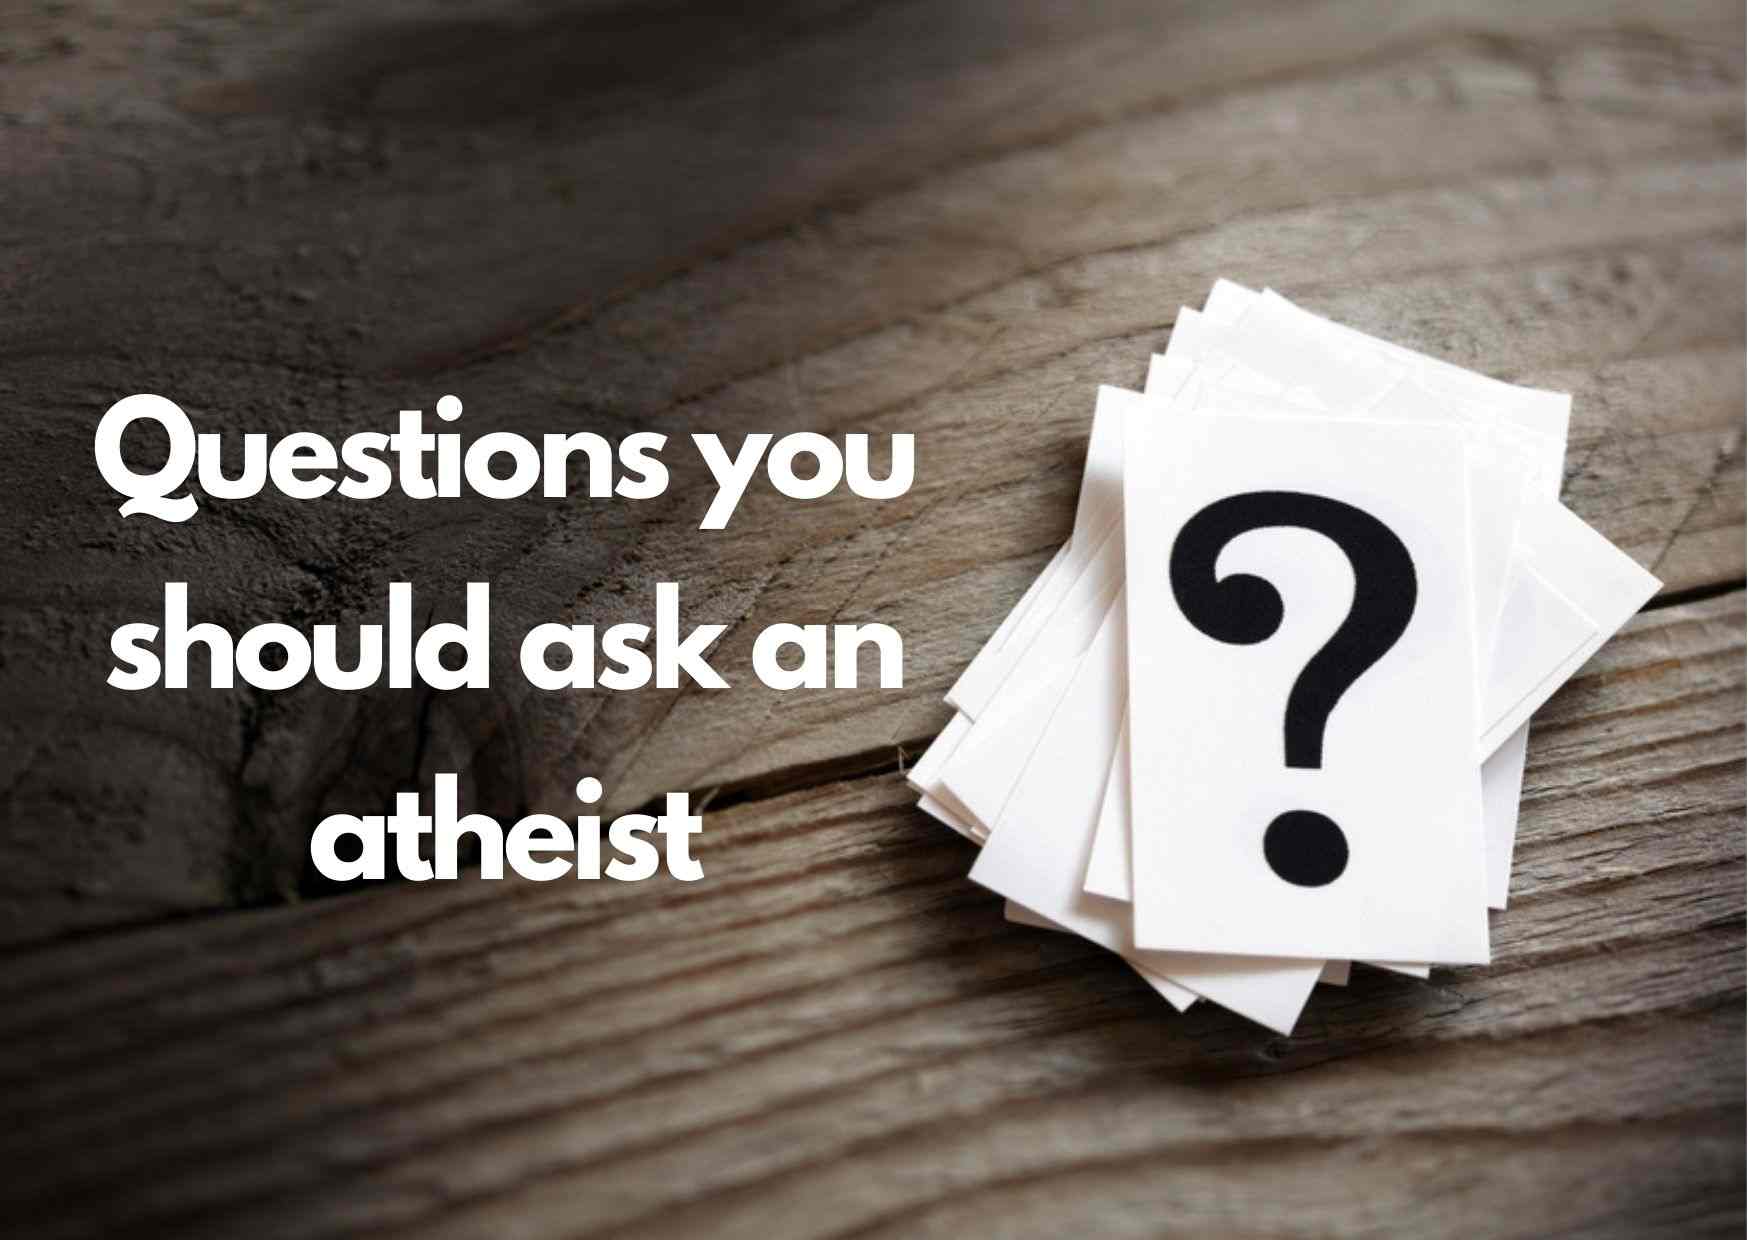 Confront atheists with questions